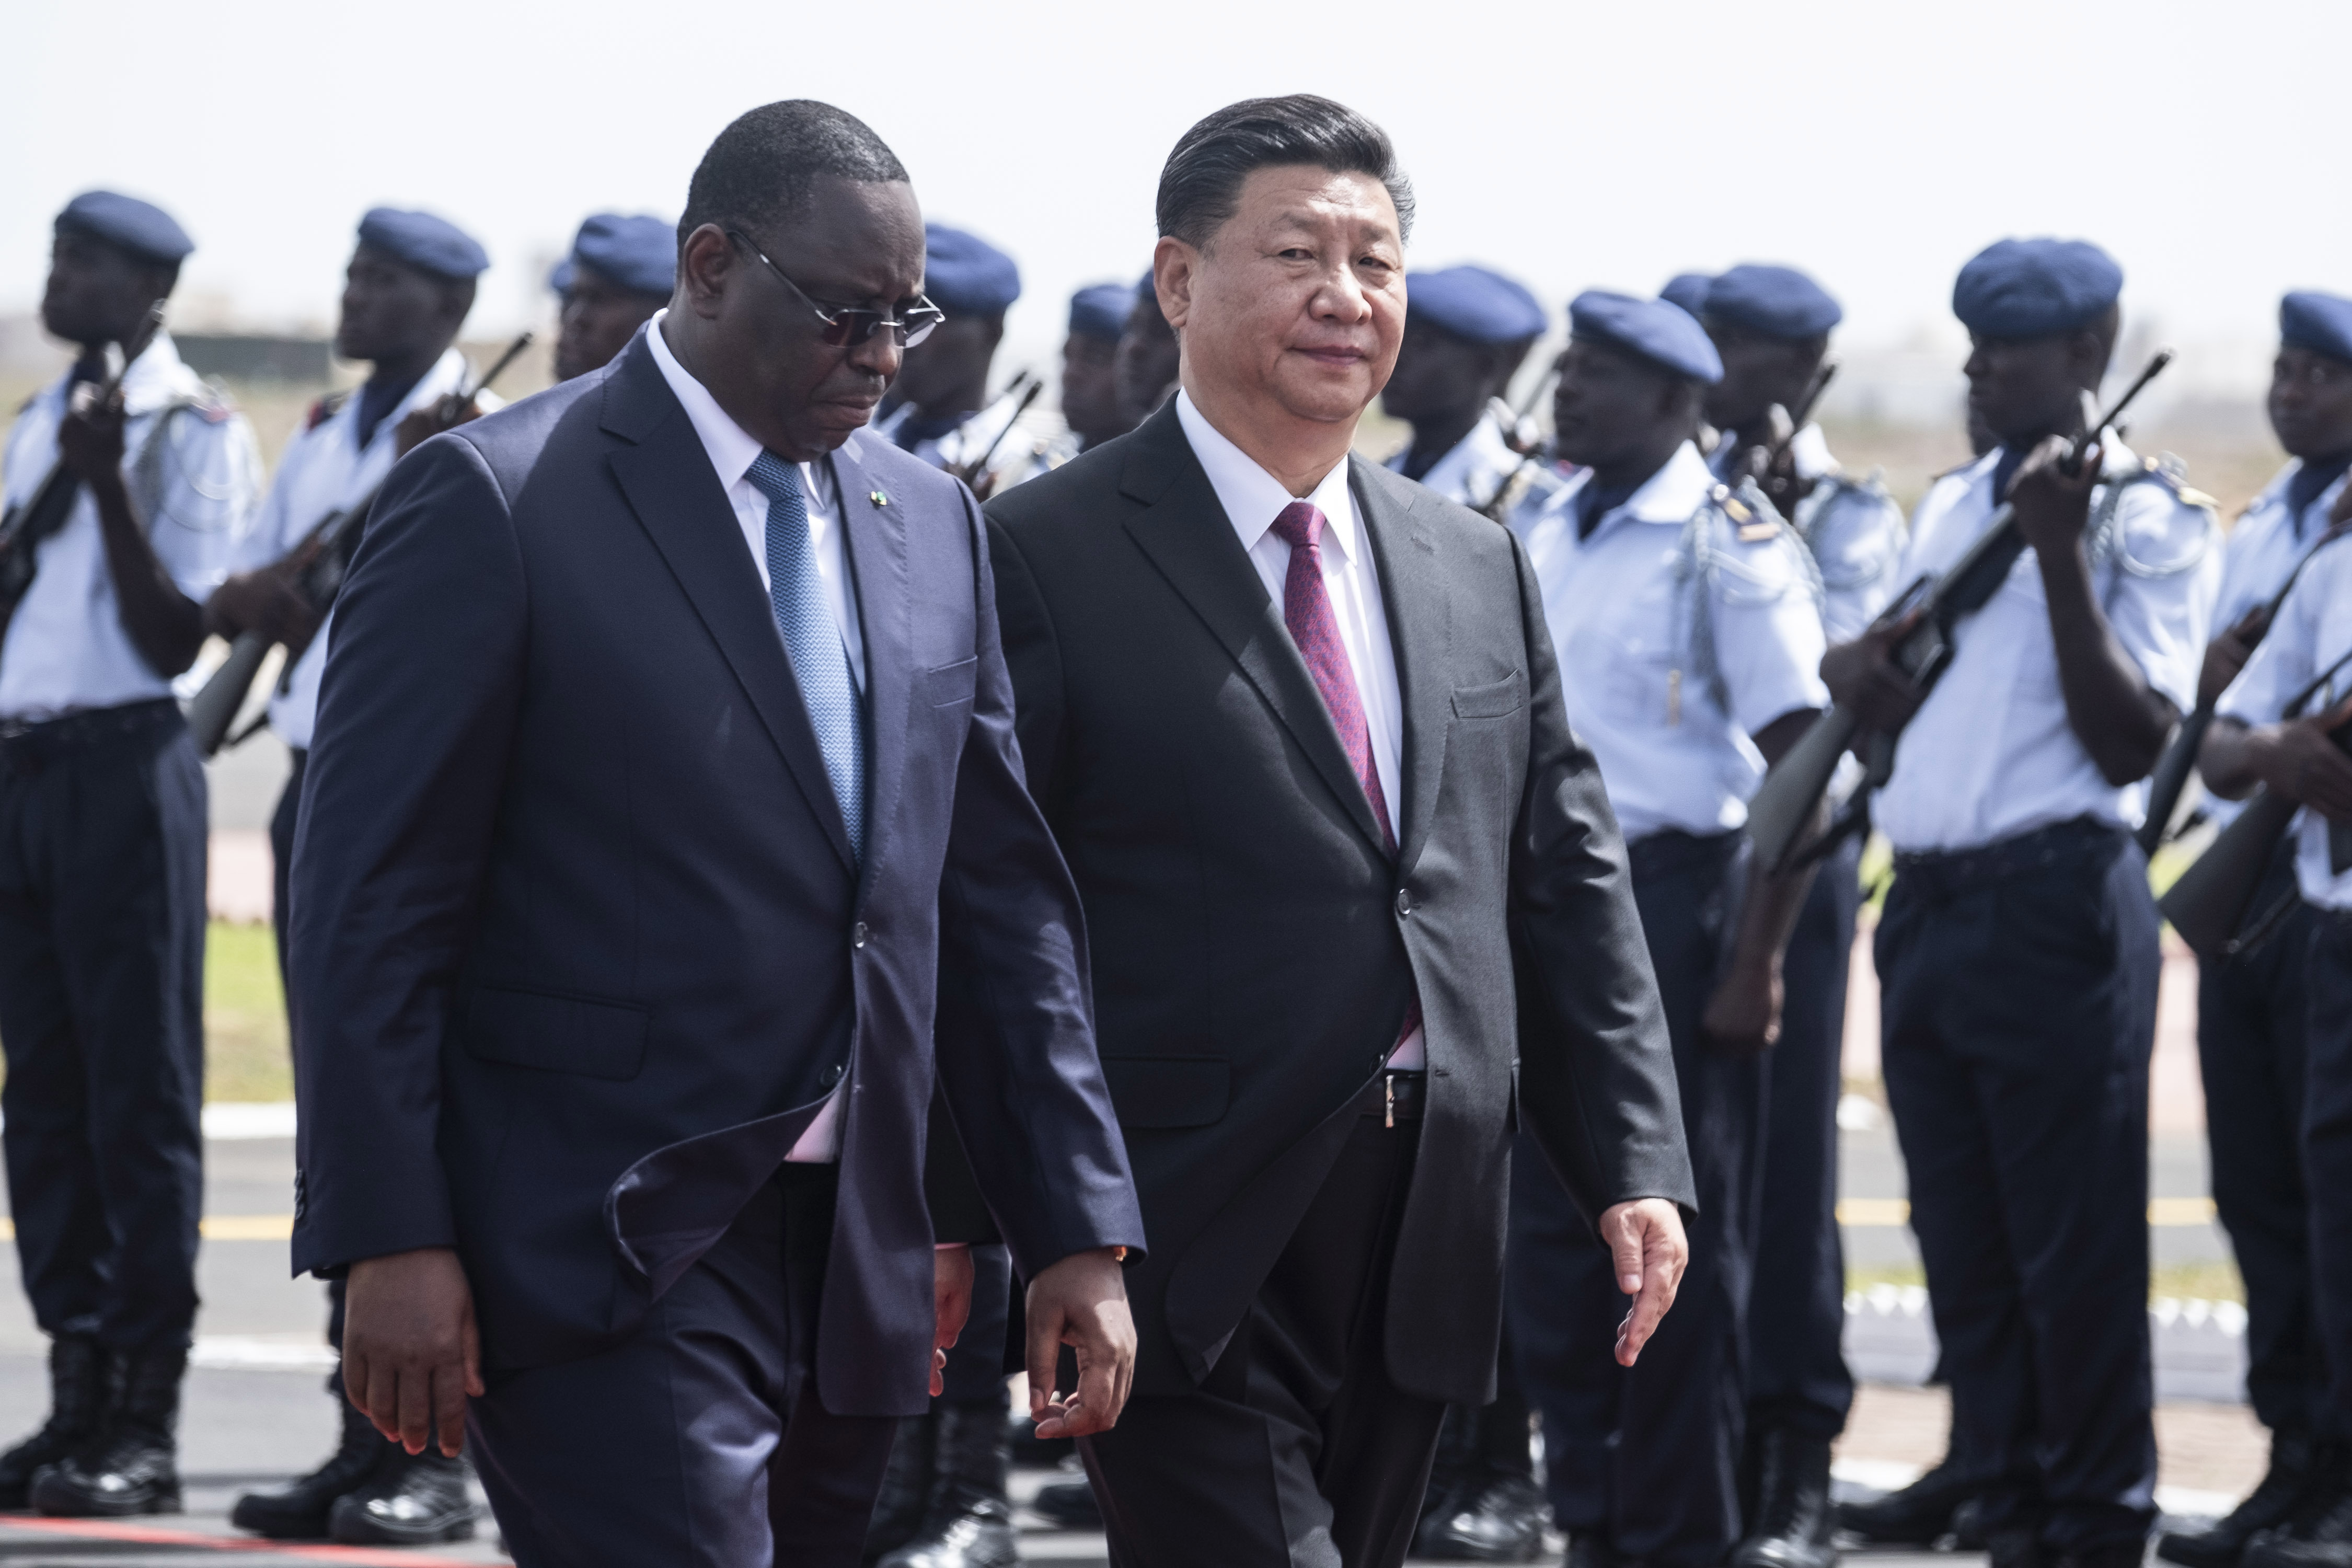 Senegal president Macky Sall, left, and Chinese President Xi Jinping, inspect the honour guard during a state visit in Dakar, Senegal, Saturday, July 21, 2018. Chinese President Xi Jinping arrived in Africa on Saturday on a four-nation visit seeking deeper military and economic ties.(AP Photo/Xaume Olleros)